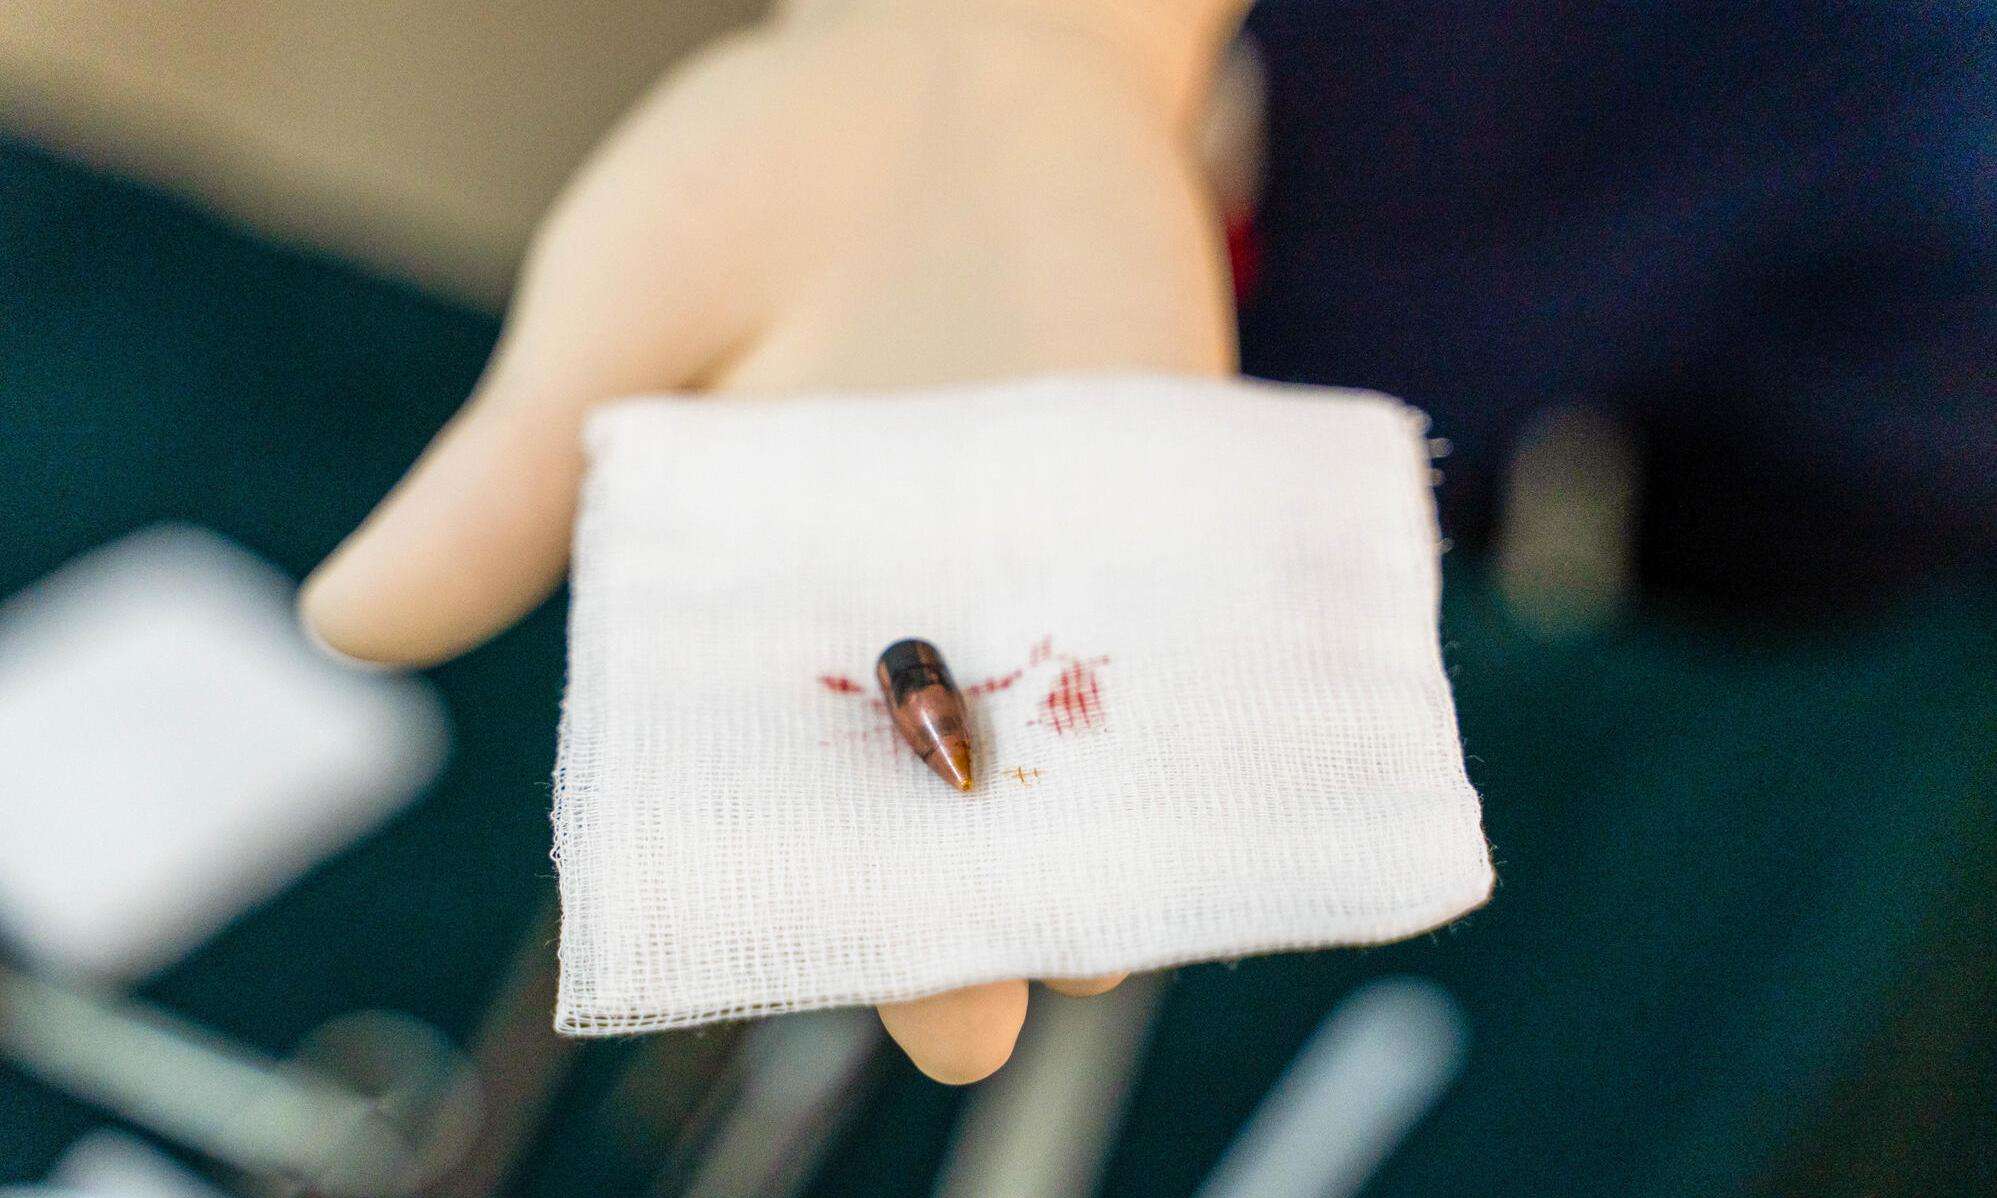 A hand holding a bullet extracted from a patient in Sudan.